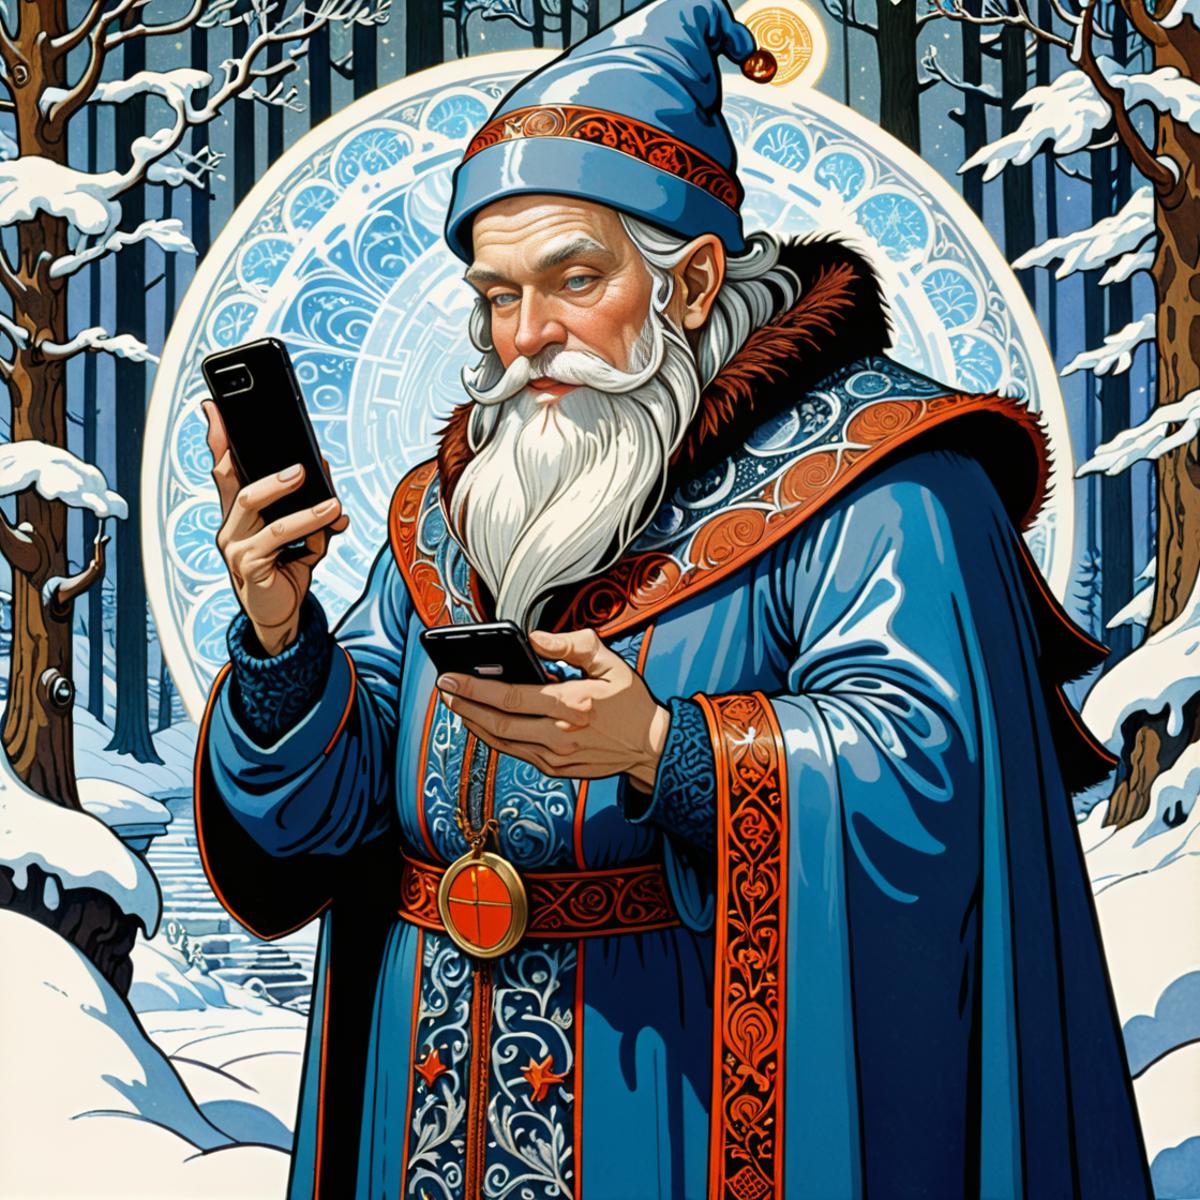 A Santa Claus figure holding a cell phone.